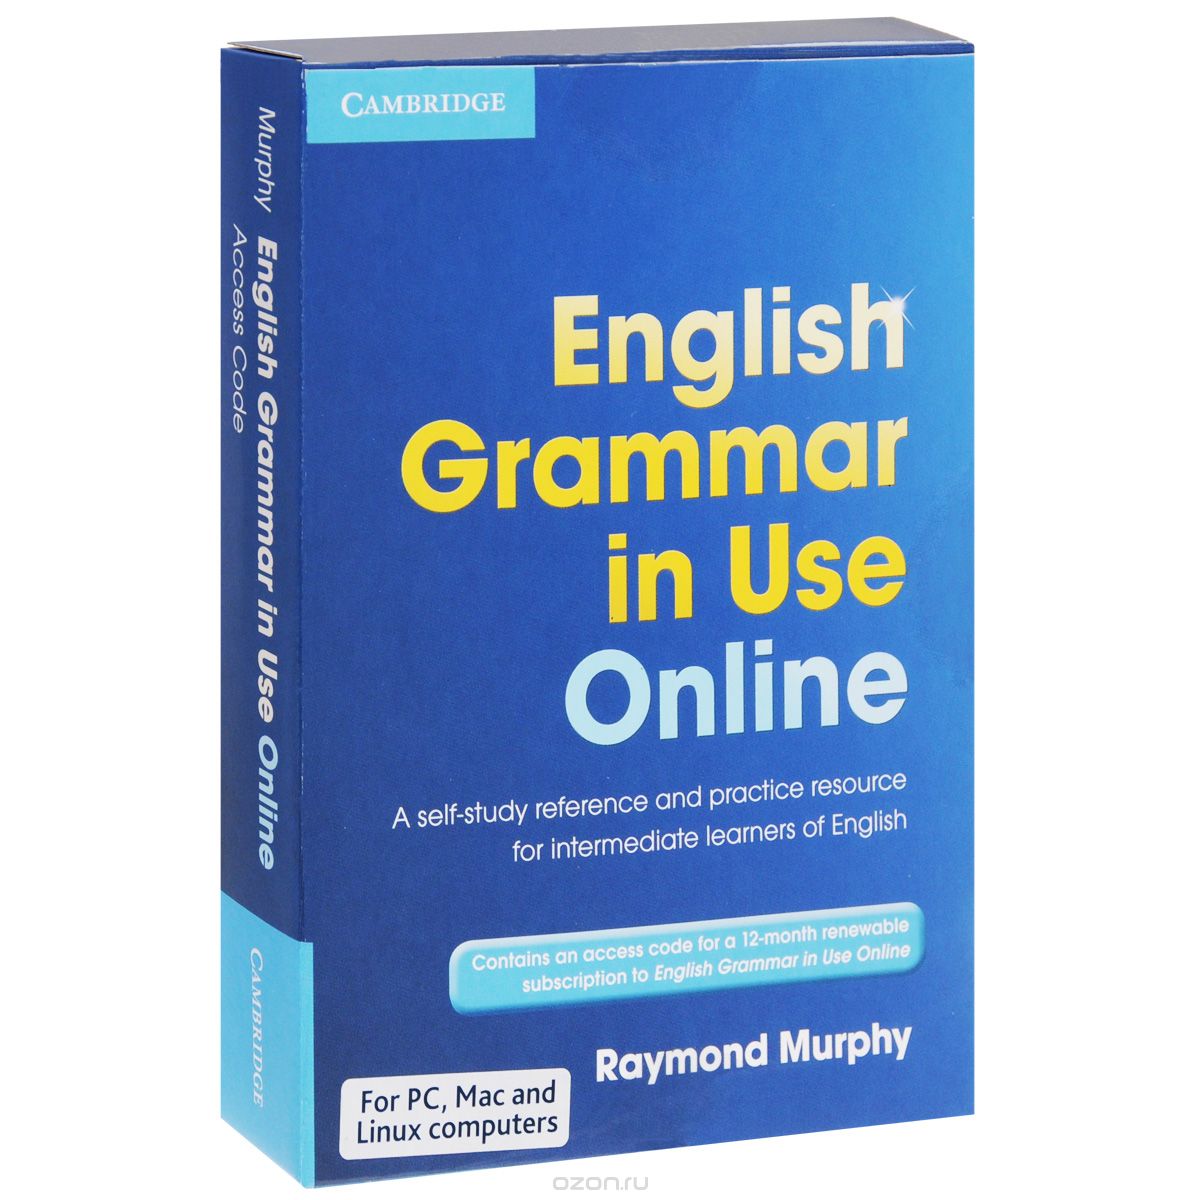 Скачать книгу "Access Code Card: English Grammar in Use Online: Access Code: A Self-Study Reference And Practice Resource for Intermediate Learners of English"